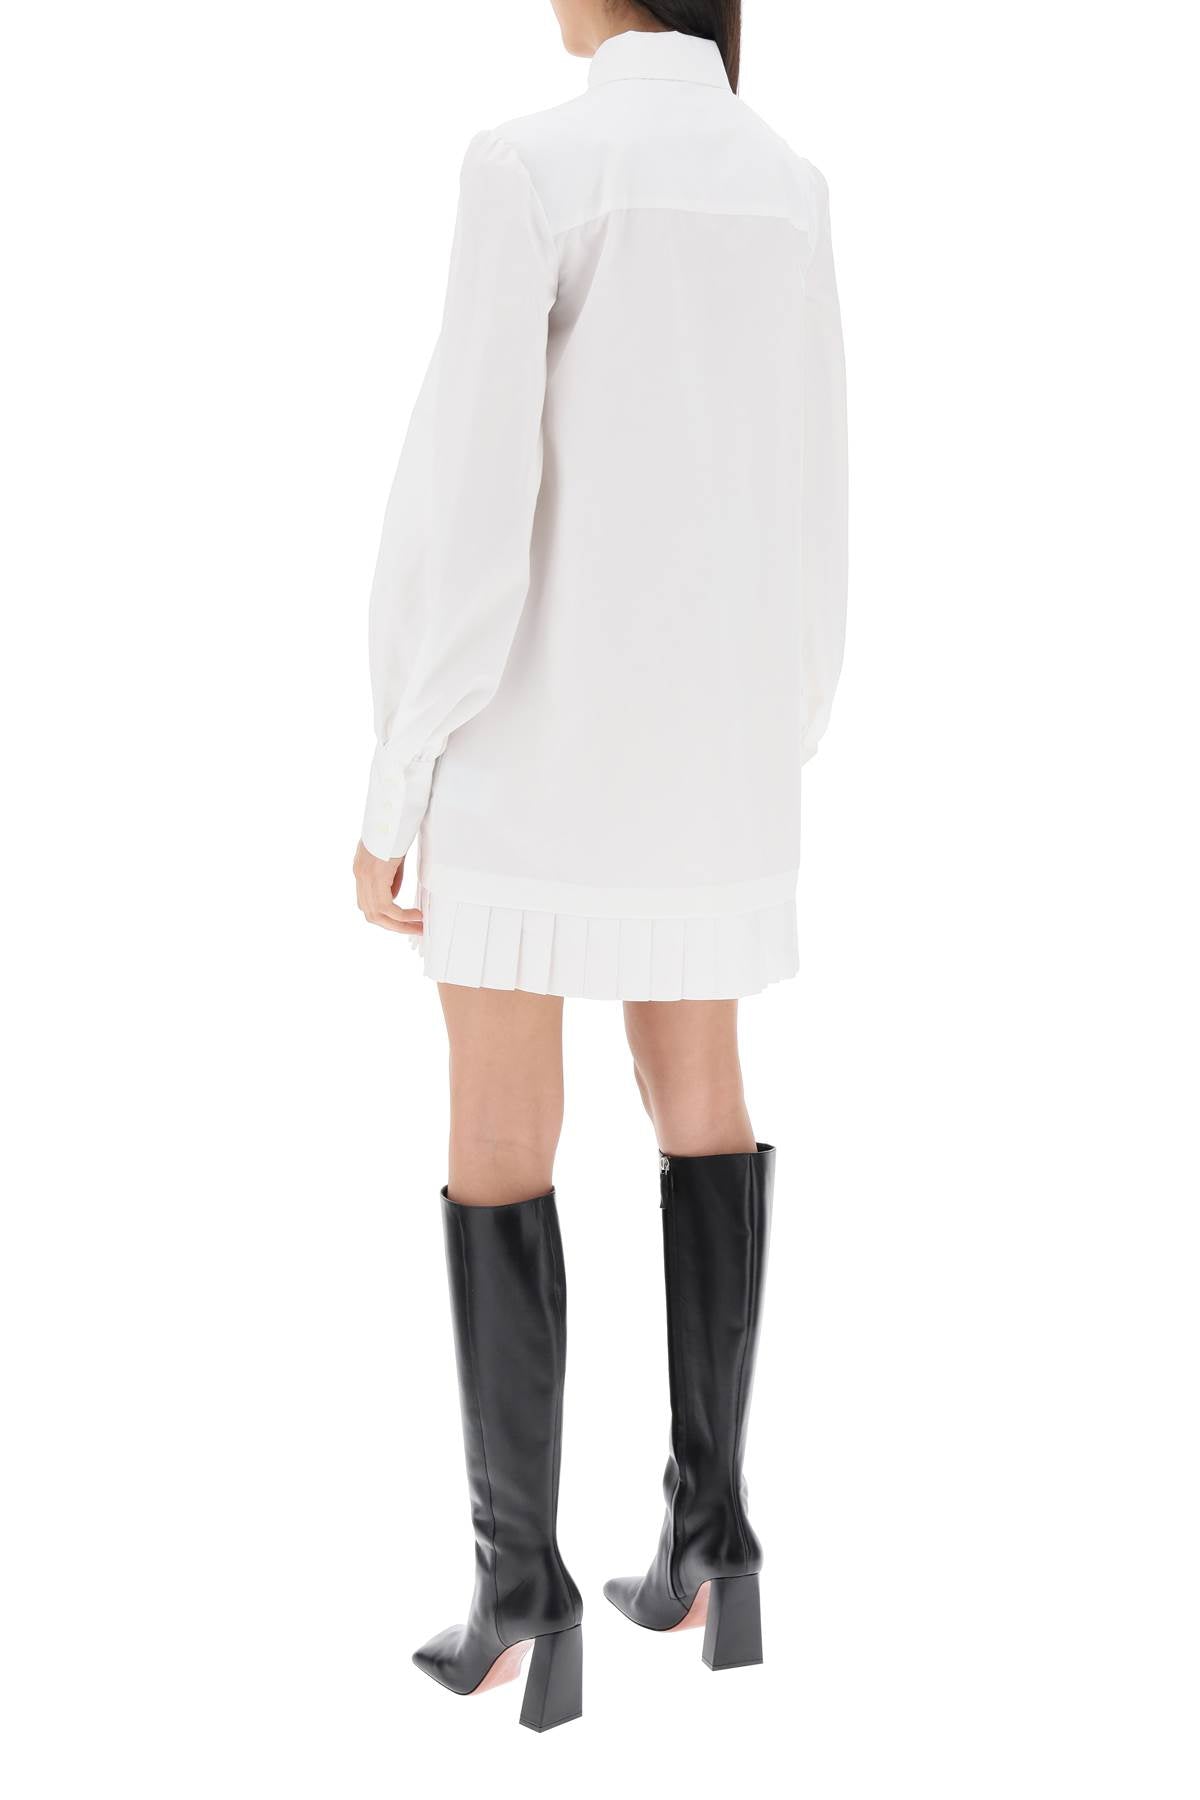 Mini Shirt Dress in White - Off-White Cotton Poplin with Bouffant Sleeves, Italian Collar, and Pleated Hem - Women's Clothing SS24